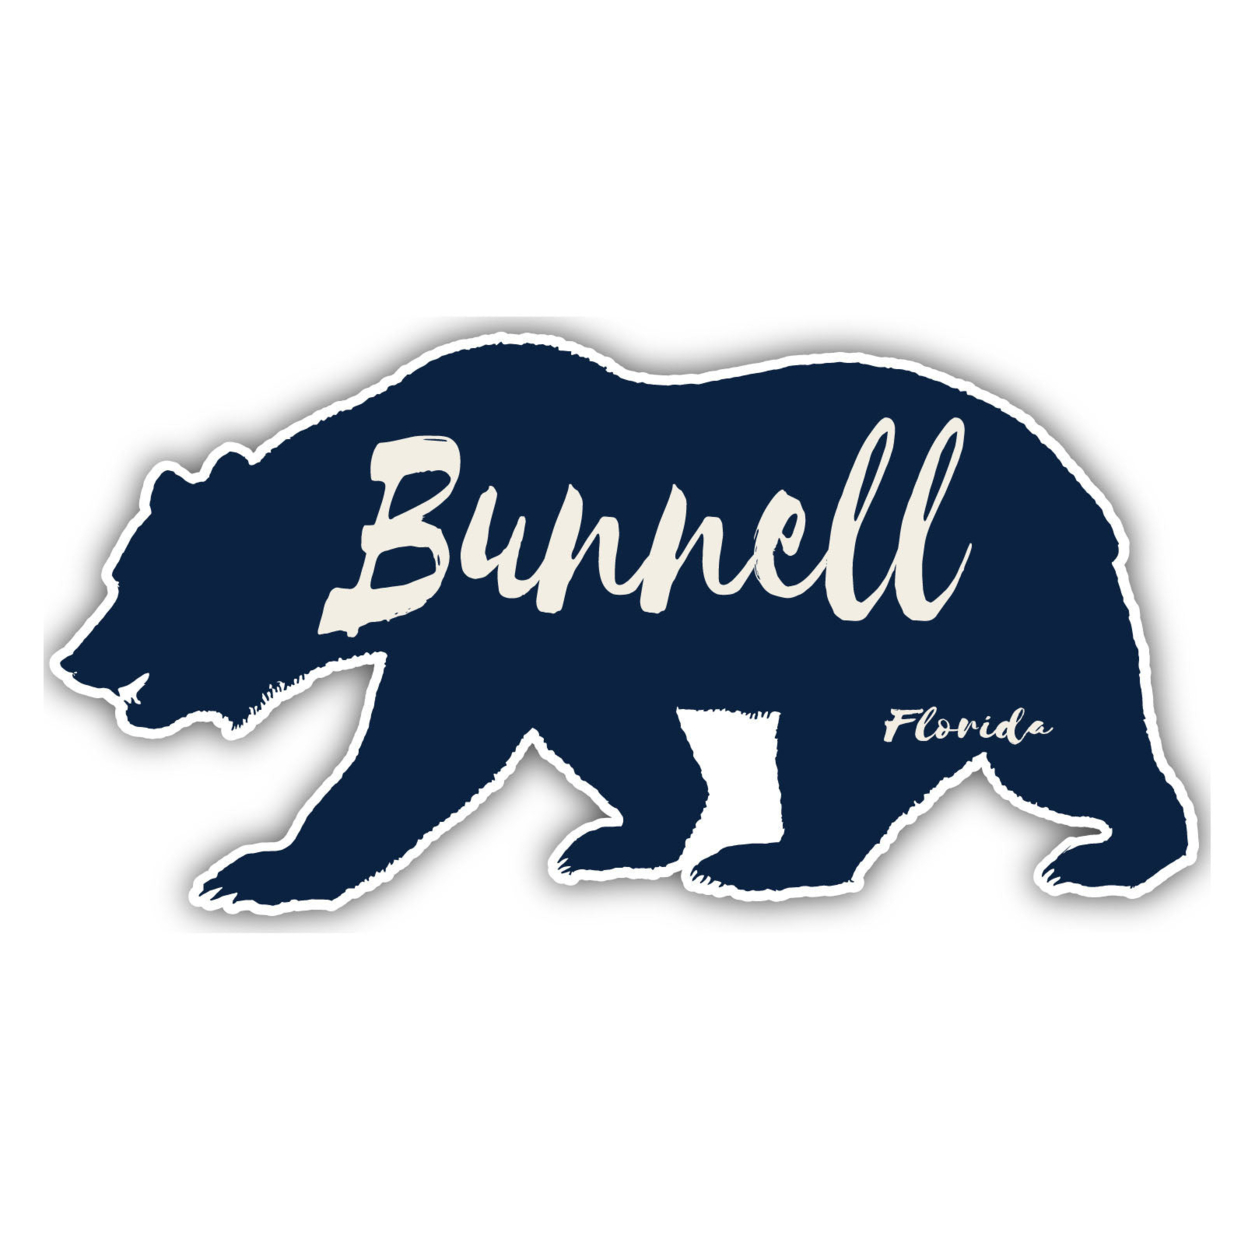 Bunnell Florida Souvenir Decorative Stickers (Choose Theme And Size) - 4-Pack, 2-Inch, Bear